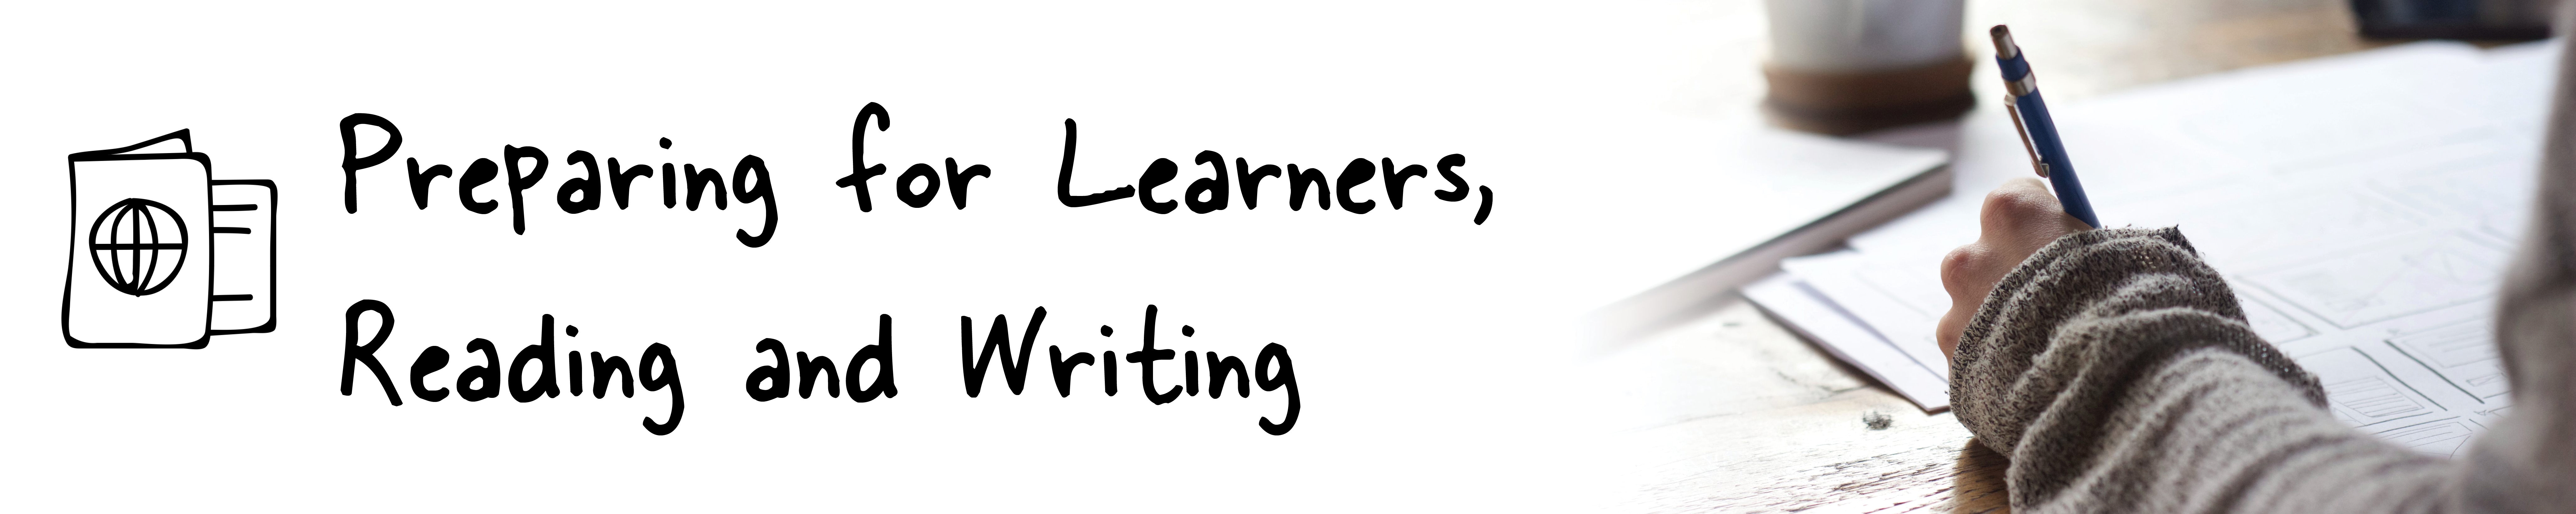 Preparing for Learners, Reading and Writing